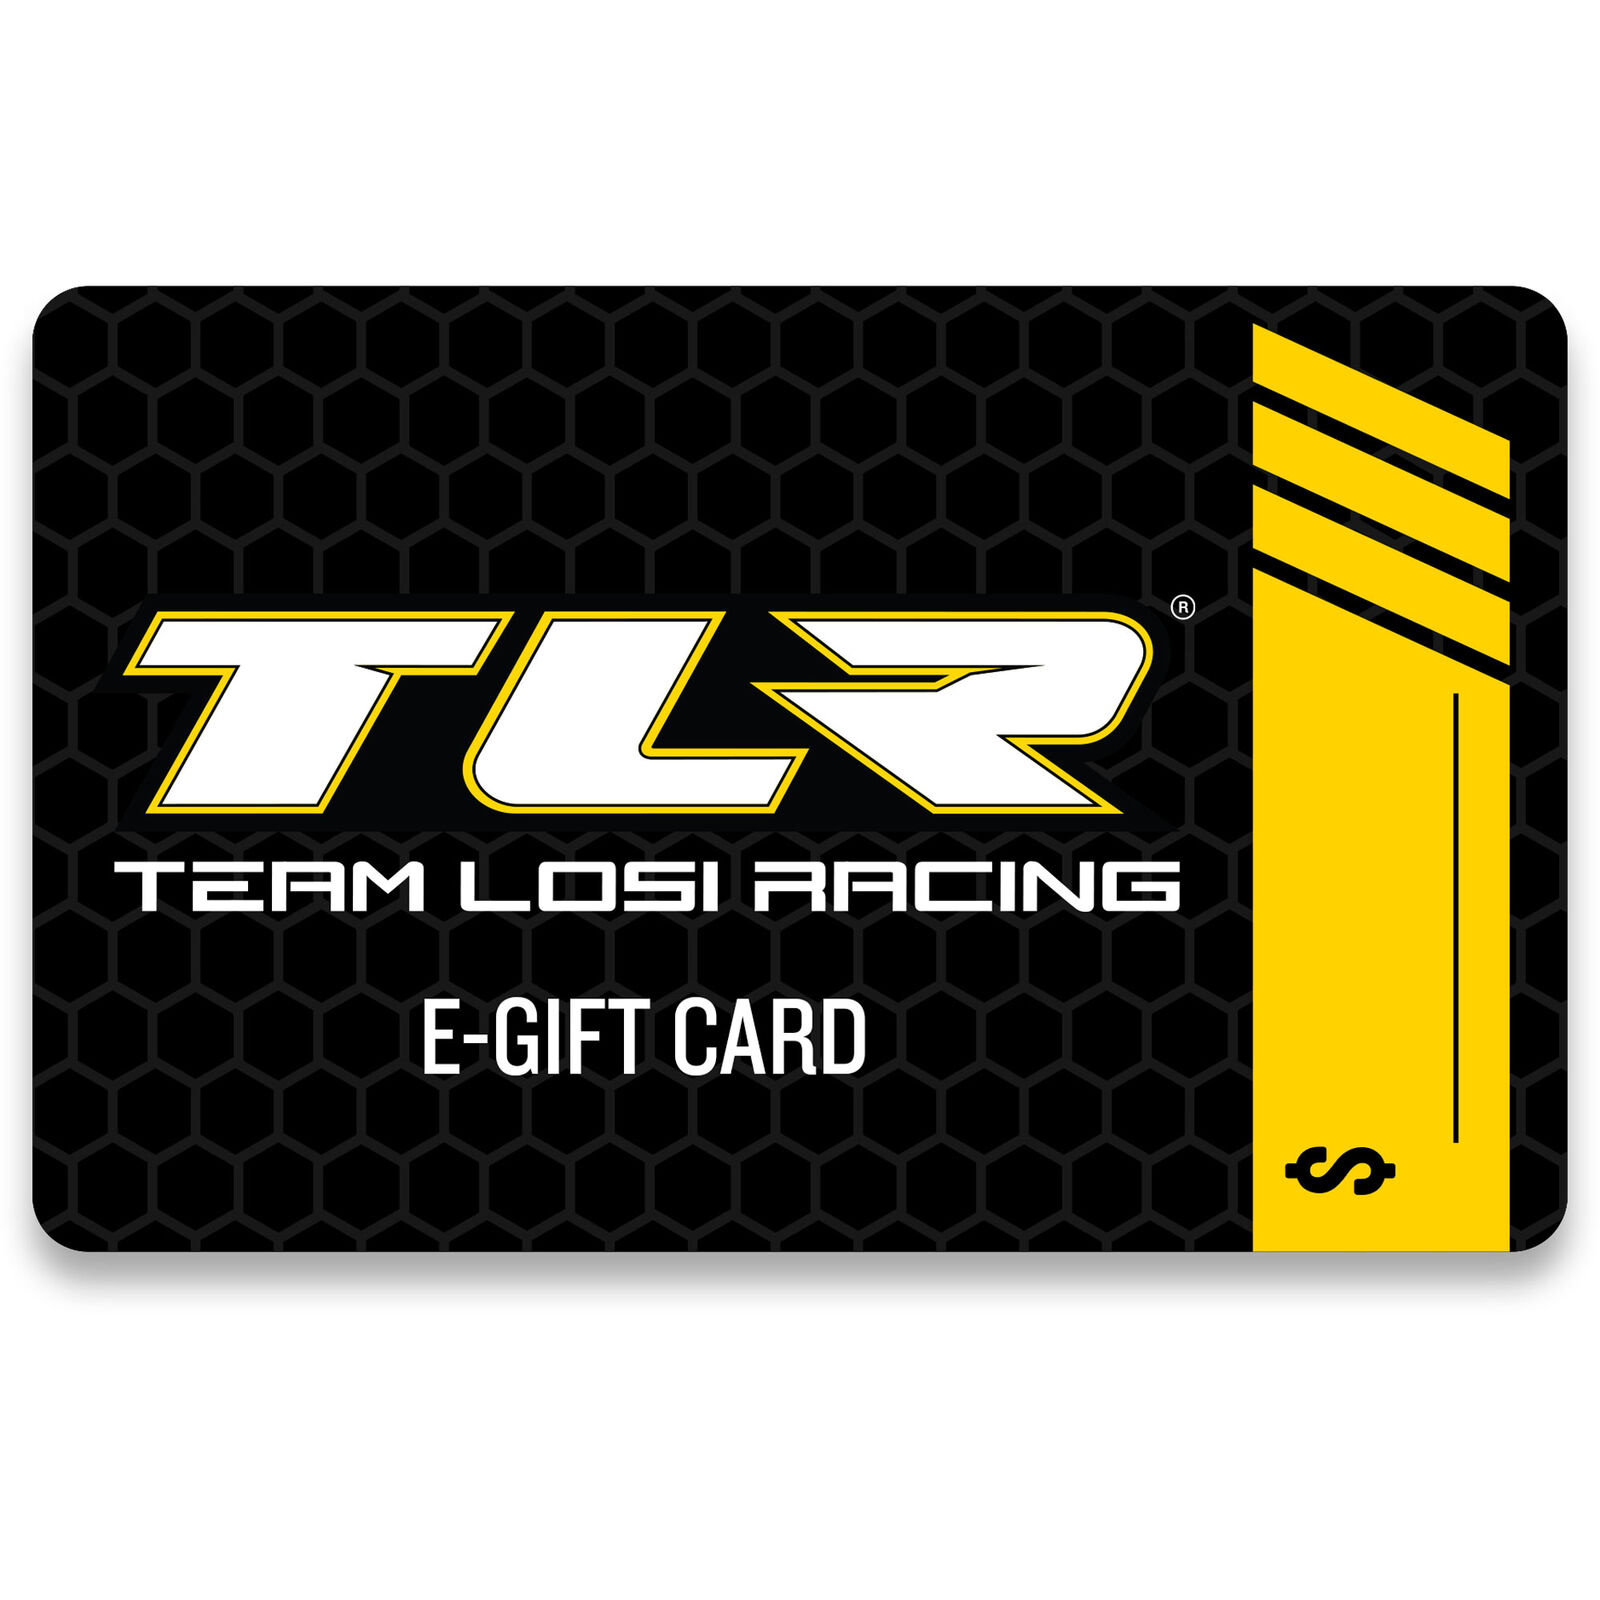 E-Gift Card $10 (emailed)